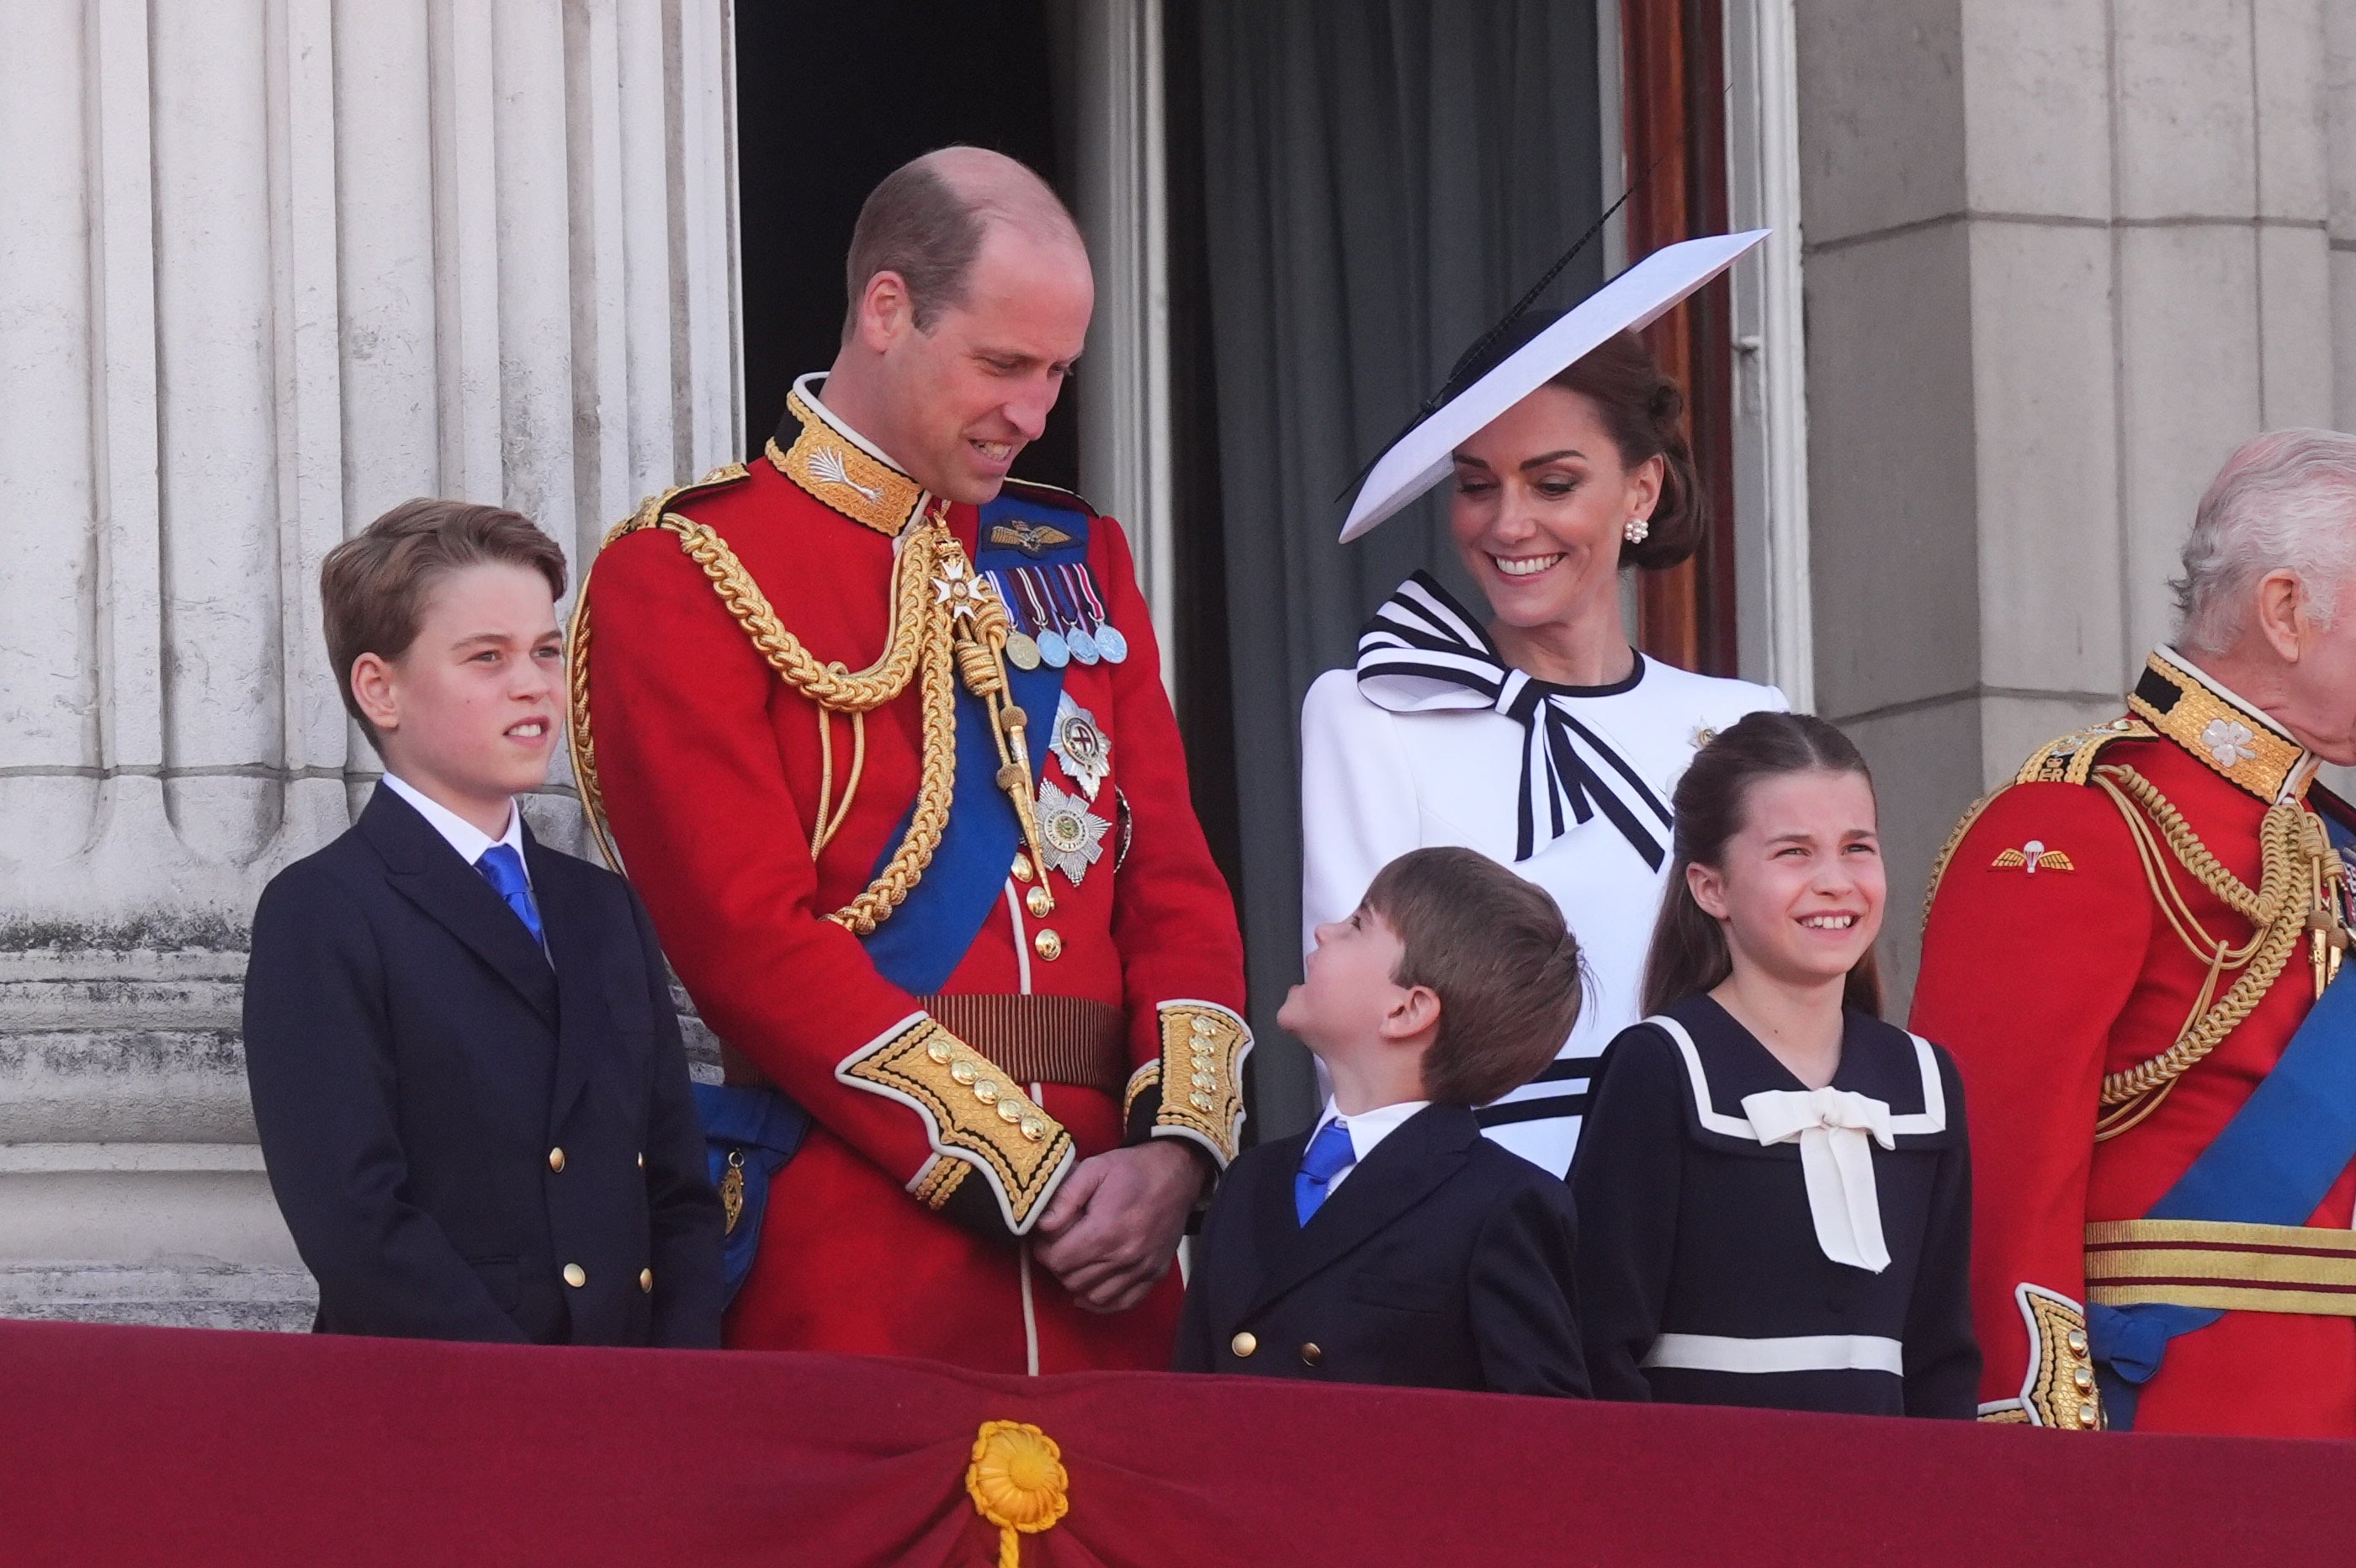 Kate and William enjoyed a family day out with their children on the balcony